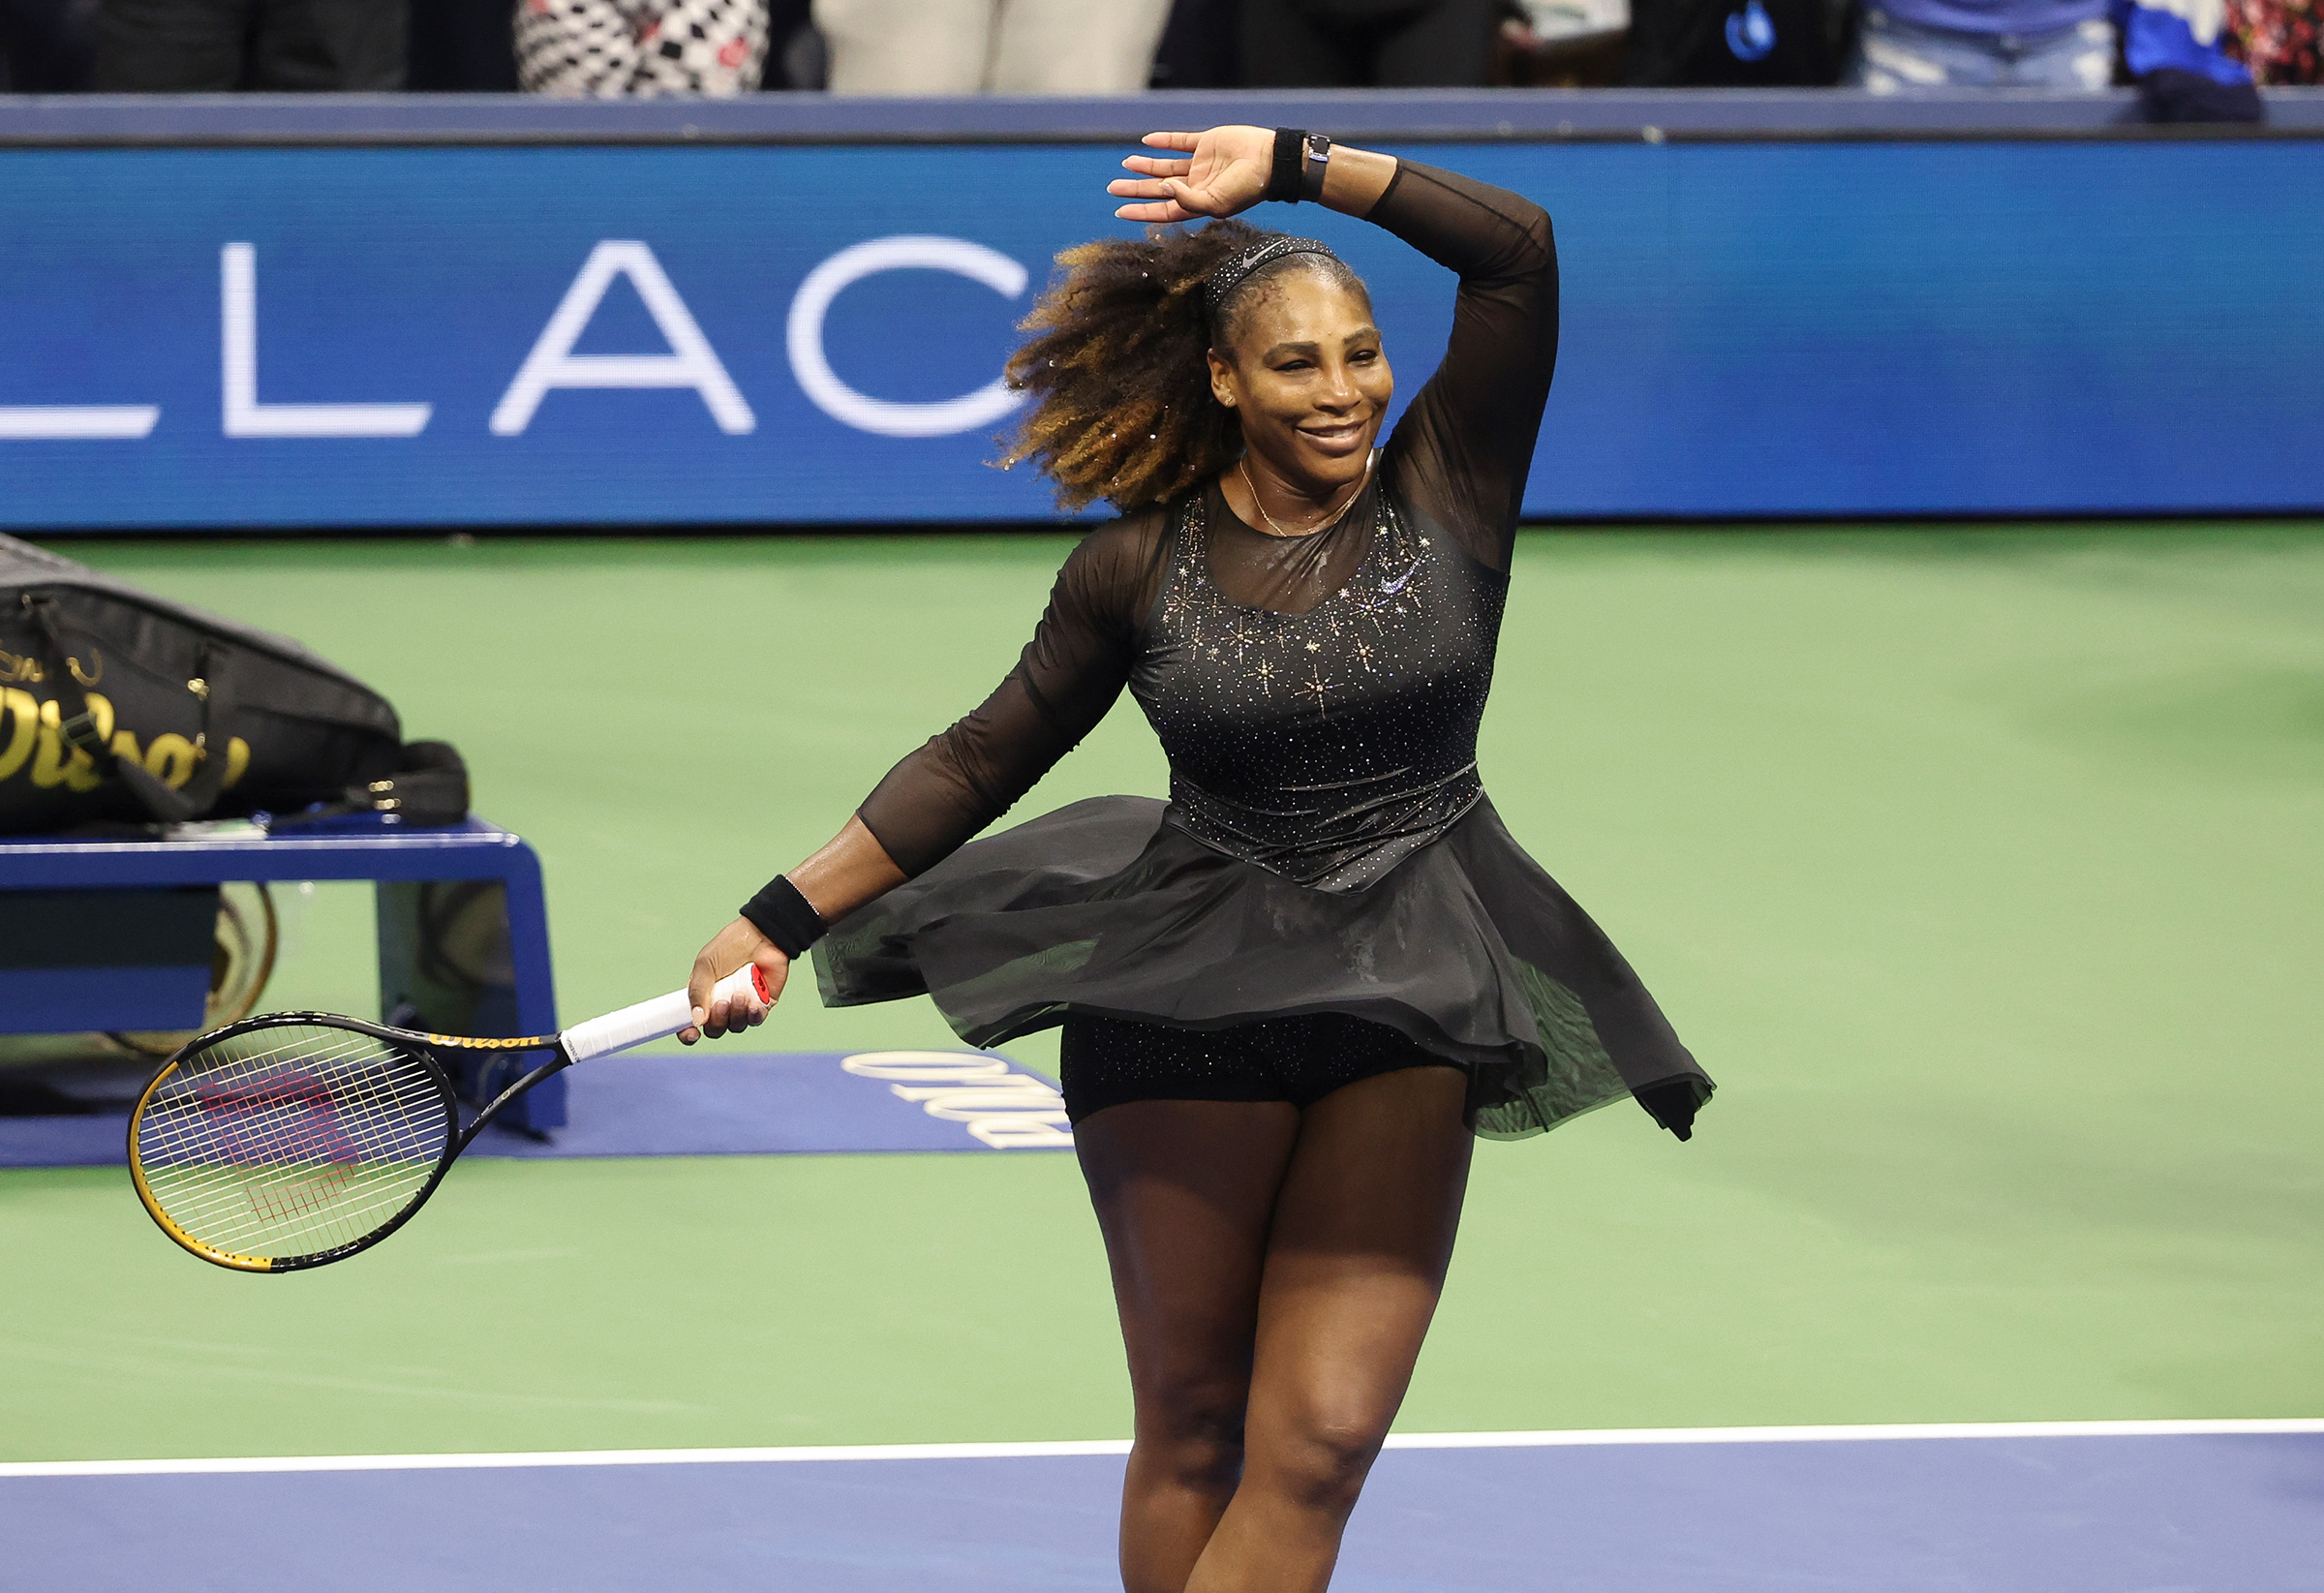 Serena Williams celebrates her first-round victory at the 2022 U.S. Open in Queens, N.Y., on Aug. 29, 2022. (Jean Catuffe—Getty Images)